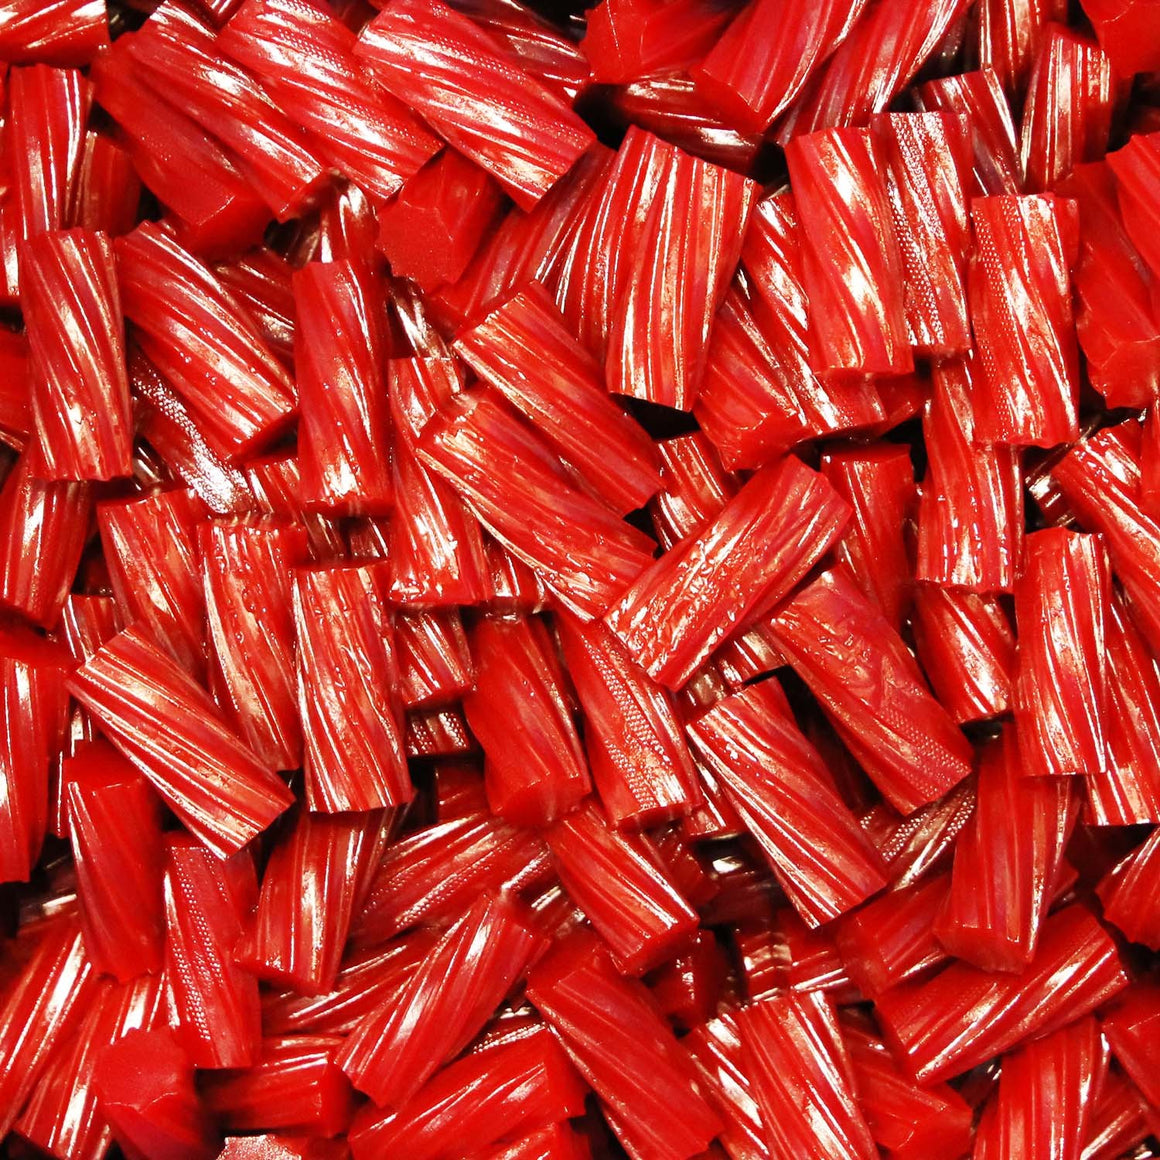 Wiley Wallaby Strawberry Gourmet Licorice Bites 2 lb. Bulk Bag - For fresh candy and great service, visit www.allcitycandy.com